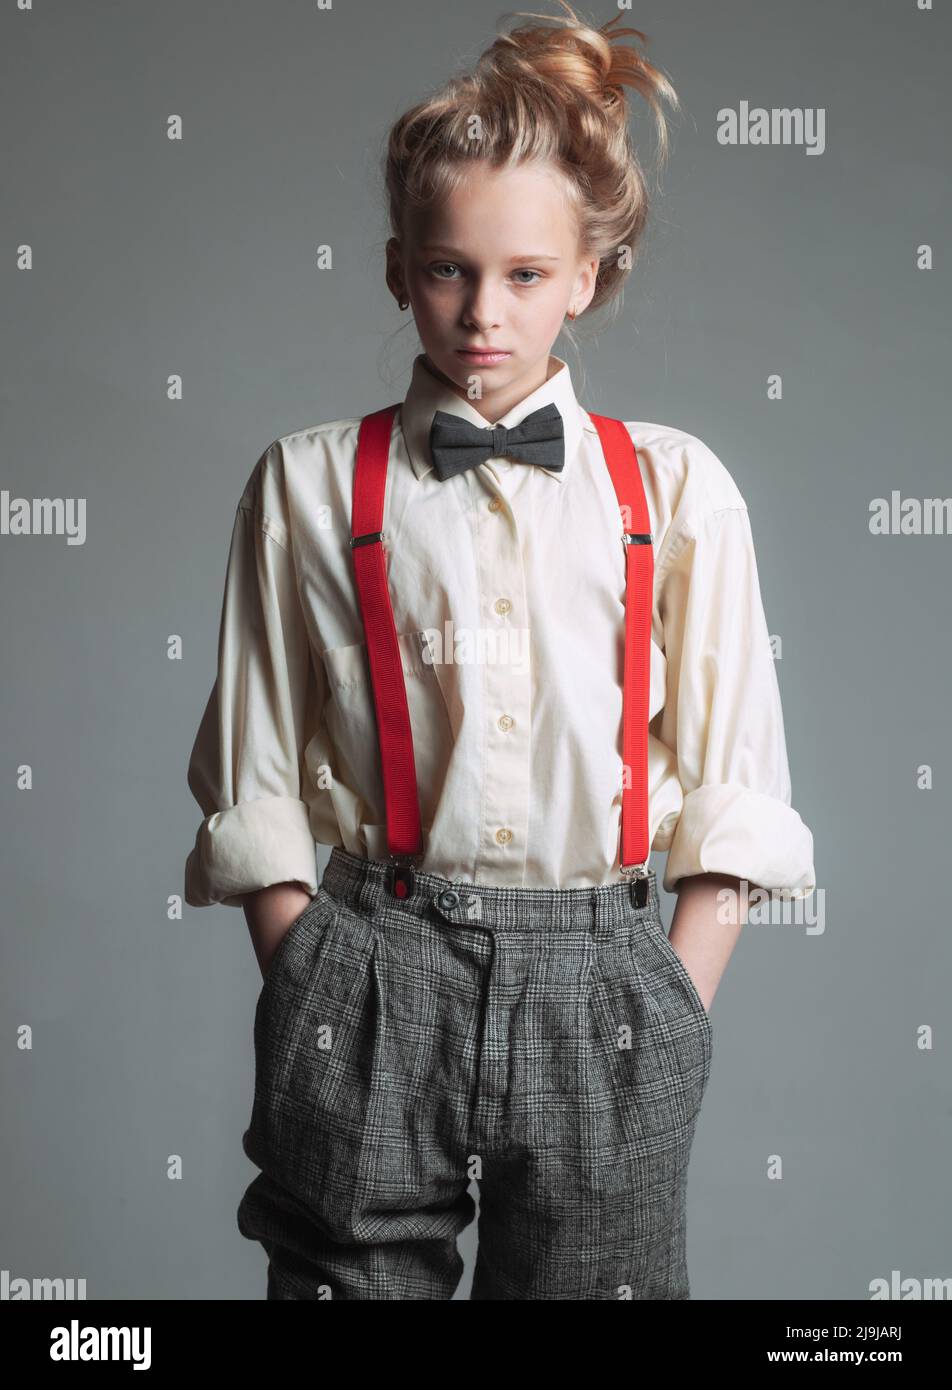 Funky style. suspender and bow tie. old fashioned child. vintage english style. retro fashion model. vintage charleston party. jazz step fashion. teen Stock Photo